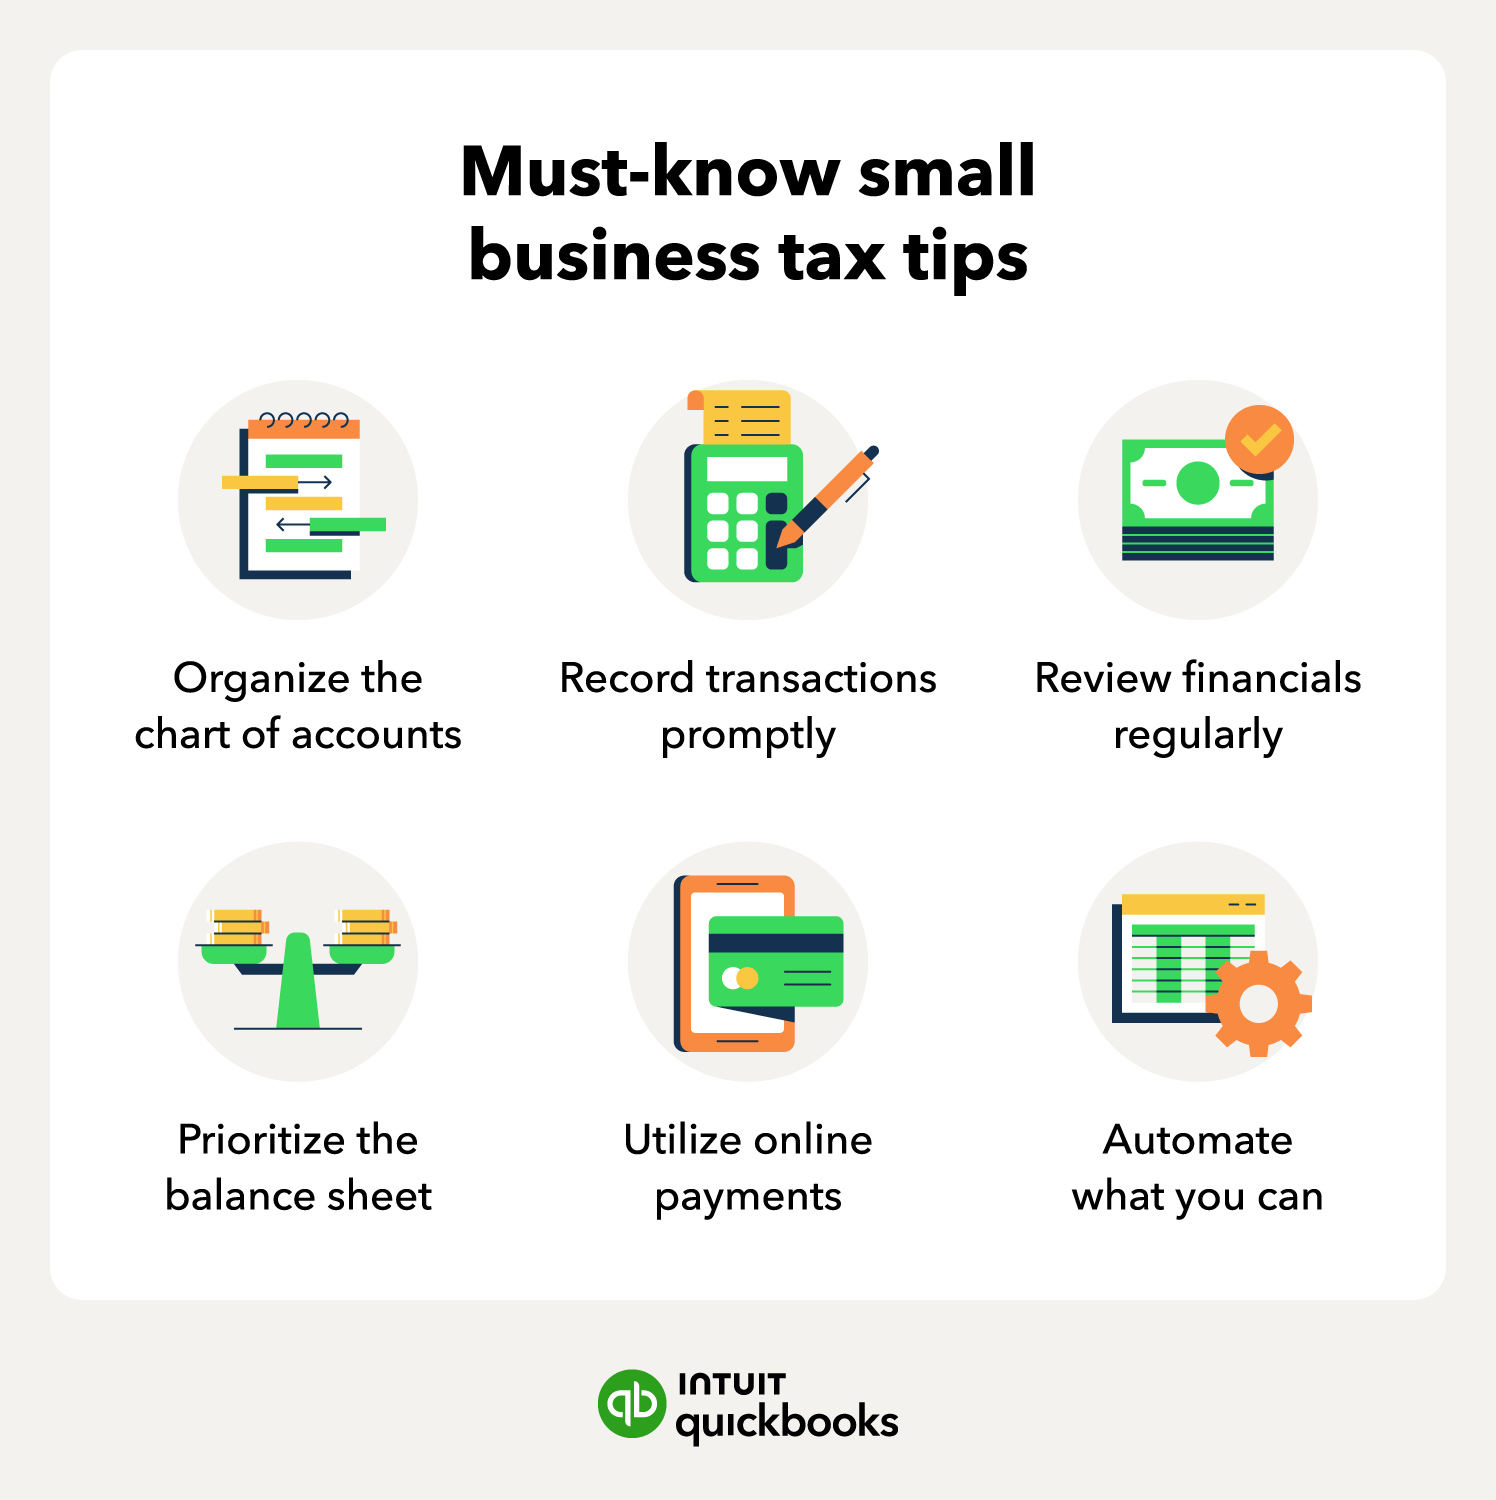 13 lesser-known small business tax tips